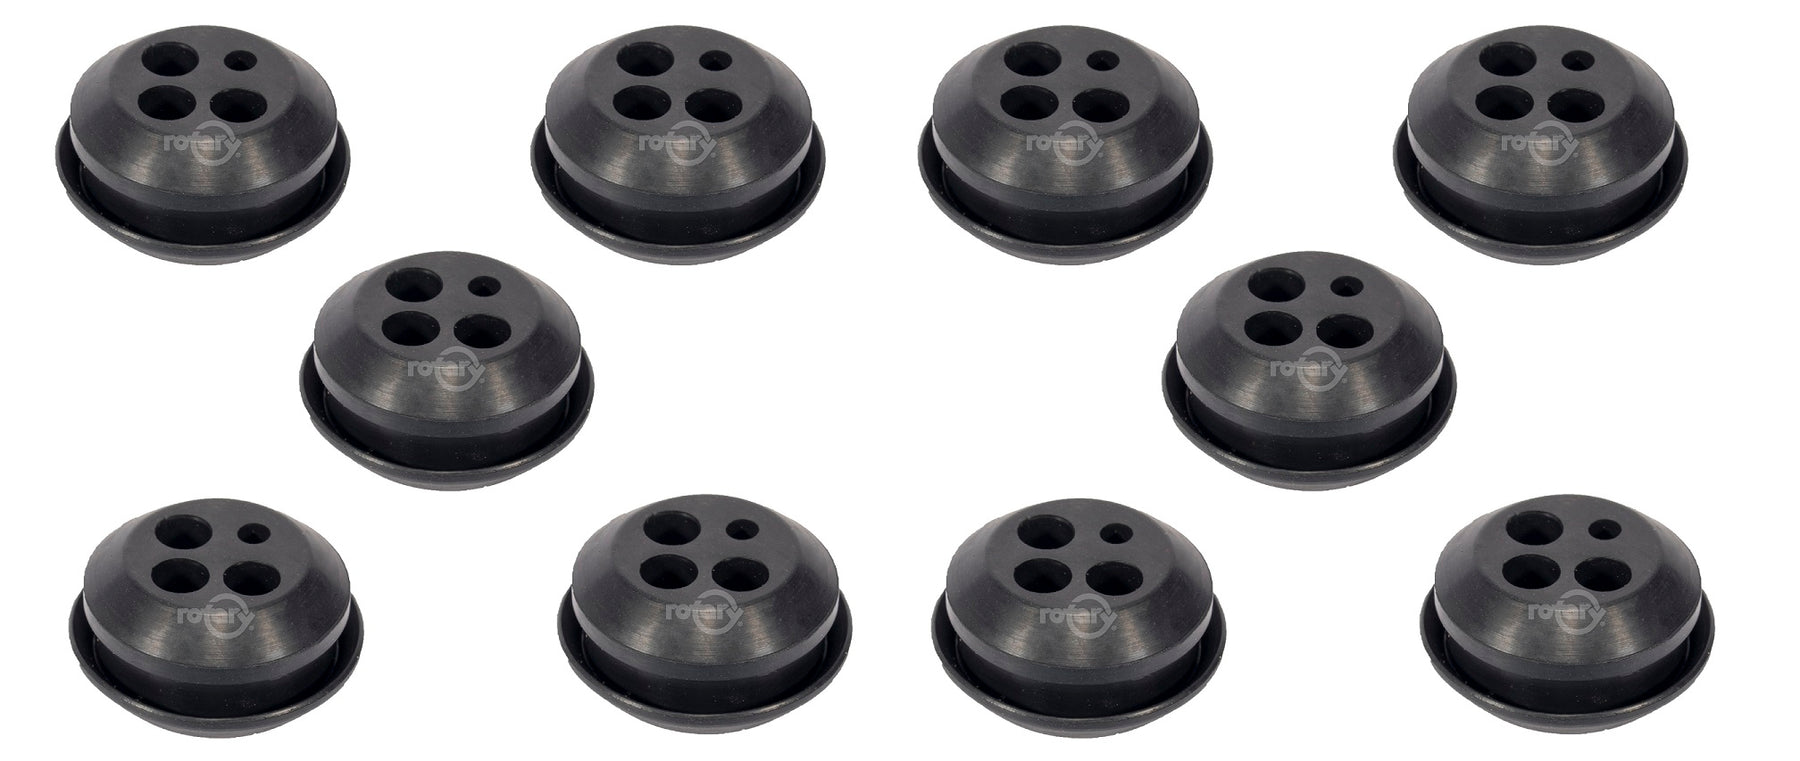 10 Pack Rotary 12606 Fuel Line Grommet 4 Hole Fits Echo 13211555930